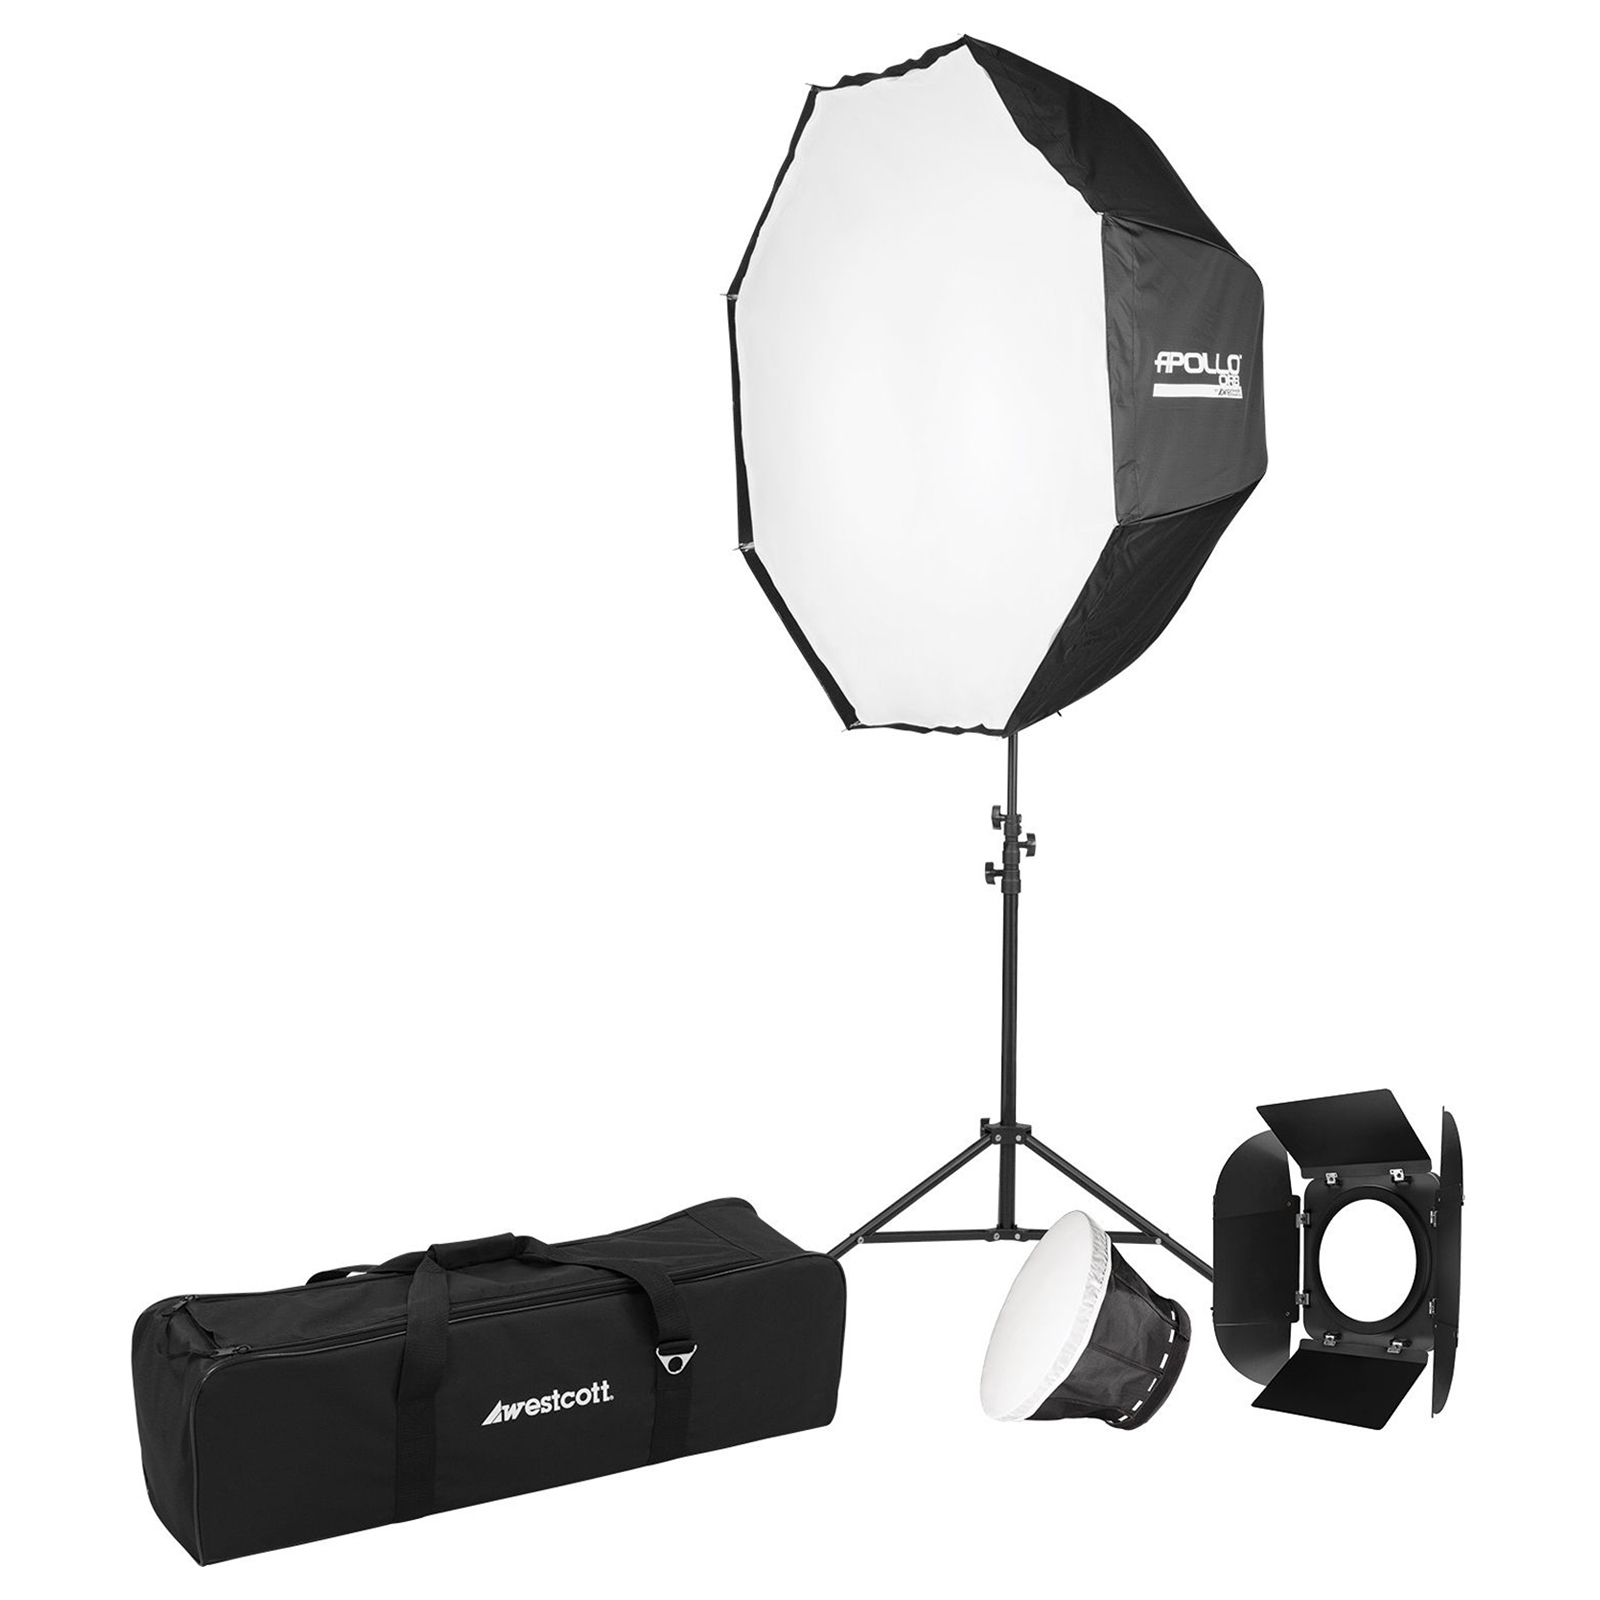 Image of Westcott Solix BiColour 1Light Kit with Apollo Orb and Stand